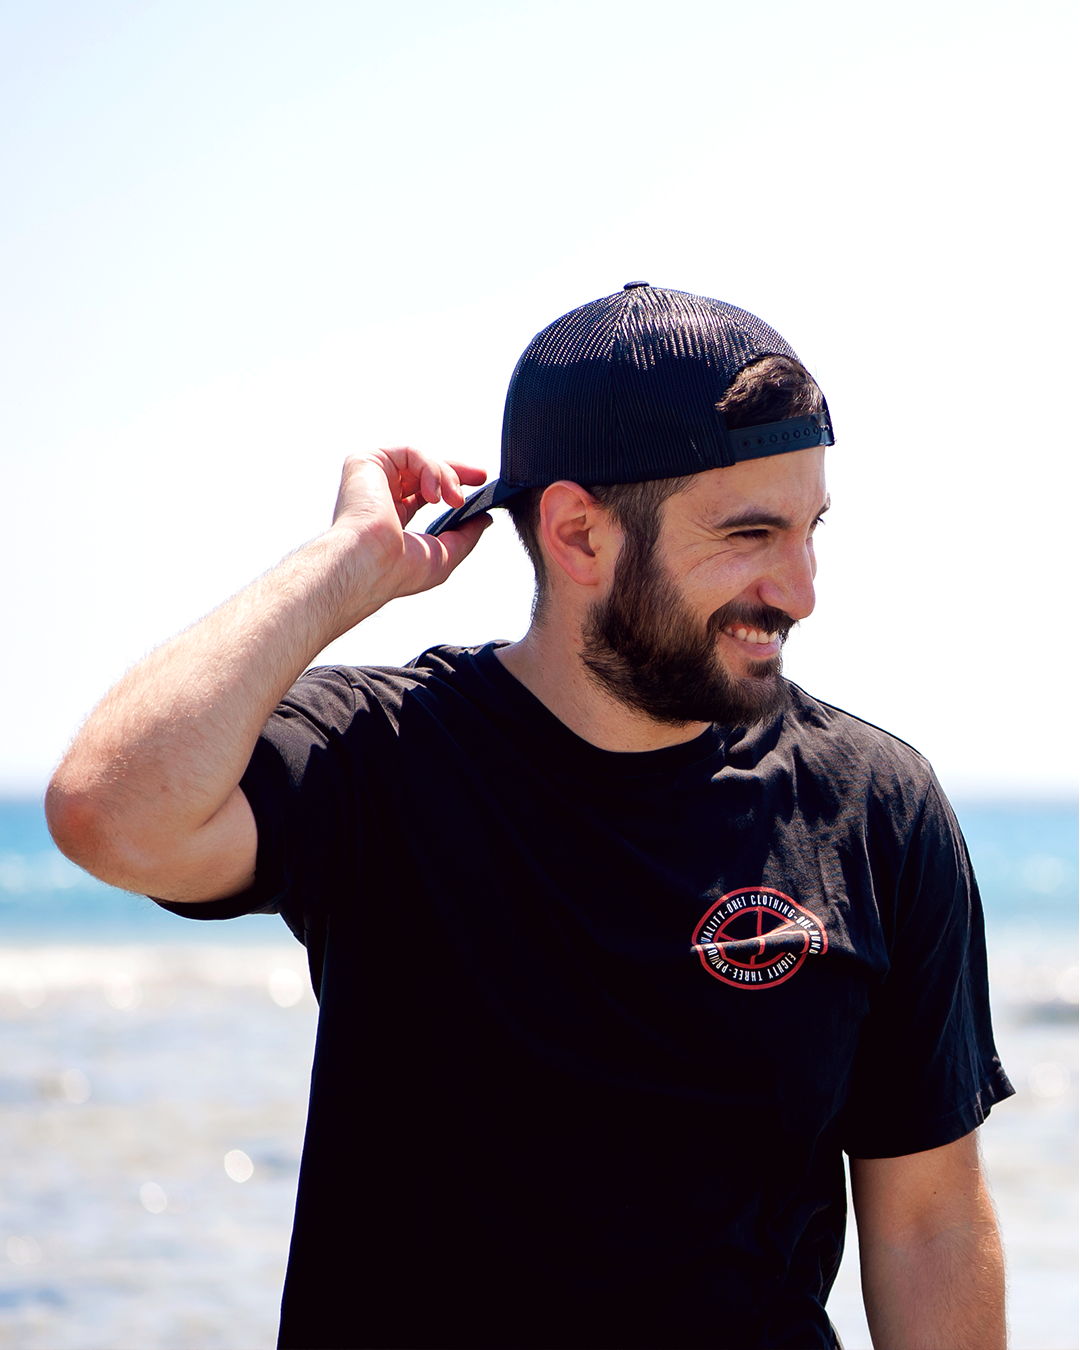 Man laughs at the beach wearing black summer outfit